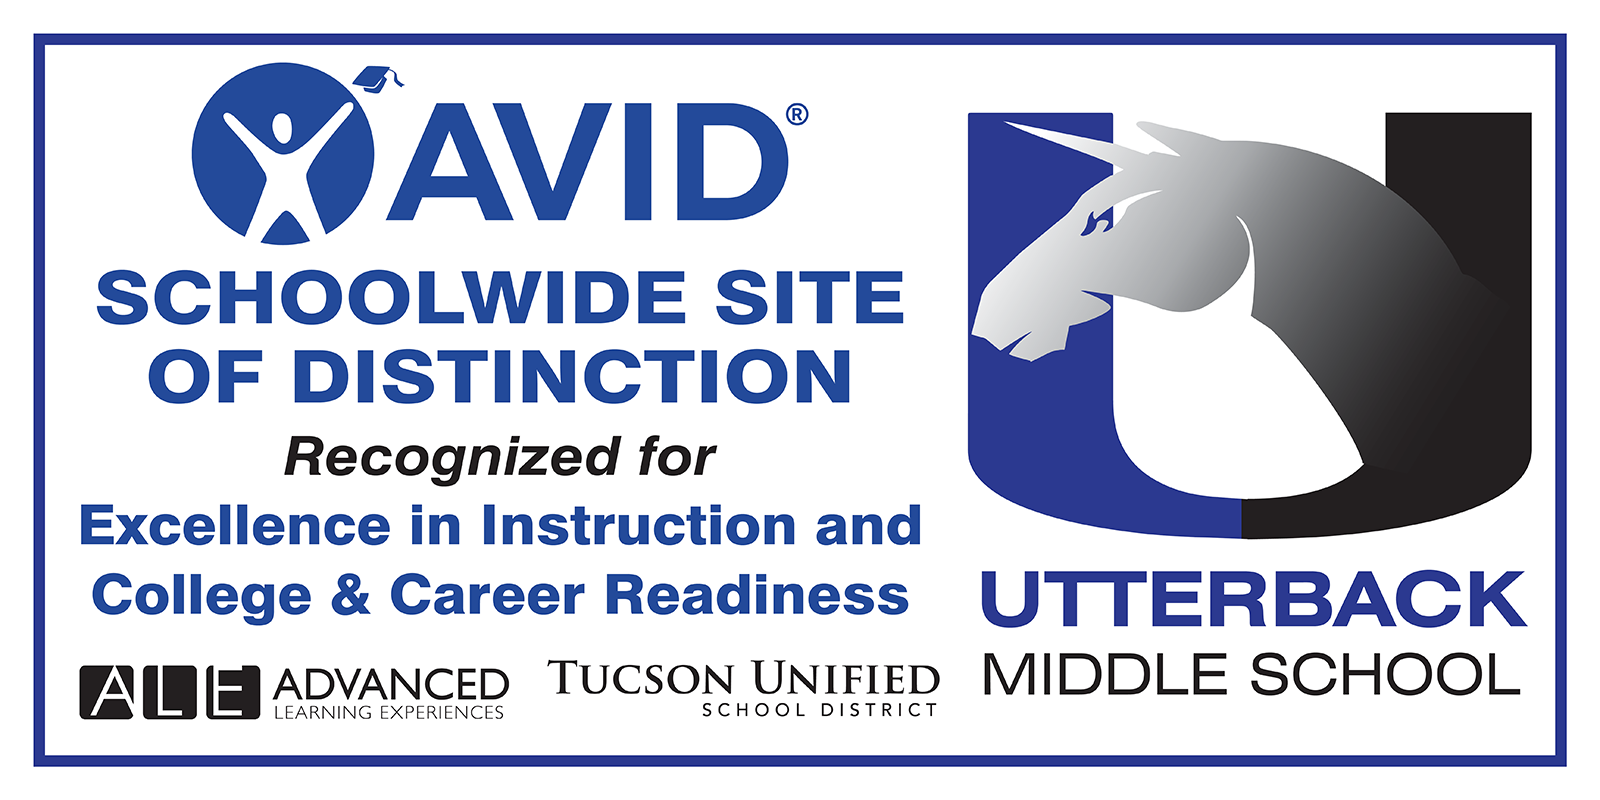 AVID School Site of Distinction, Recognized for excellence in Instruction and College and career readiness